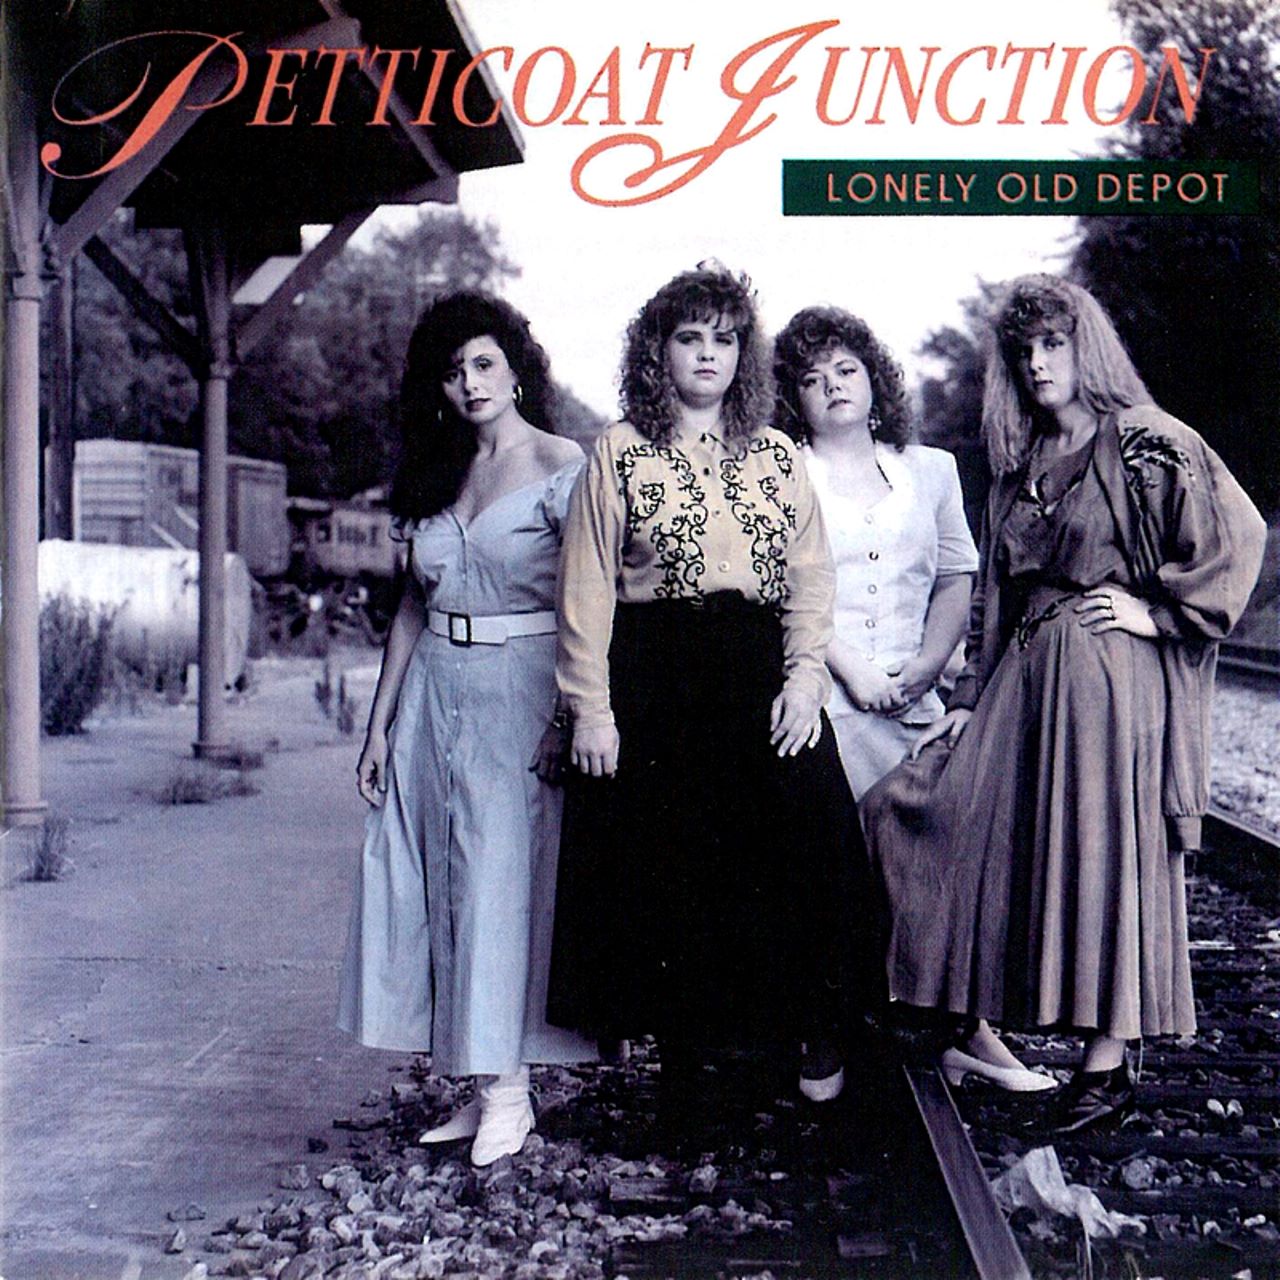 Petticoat Junction - Lonely Old Depot cover album